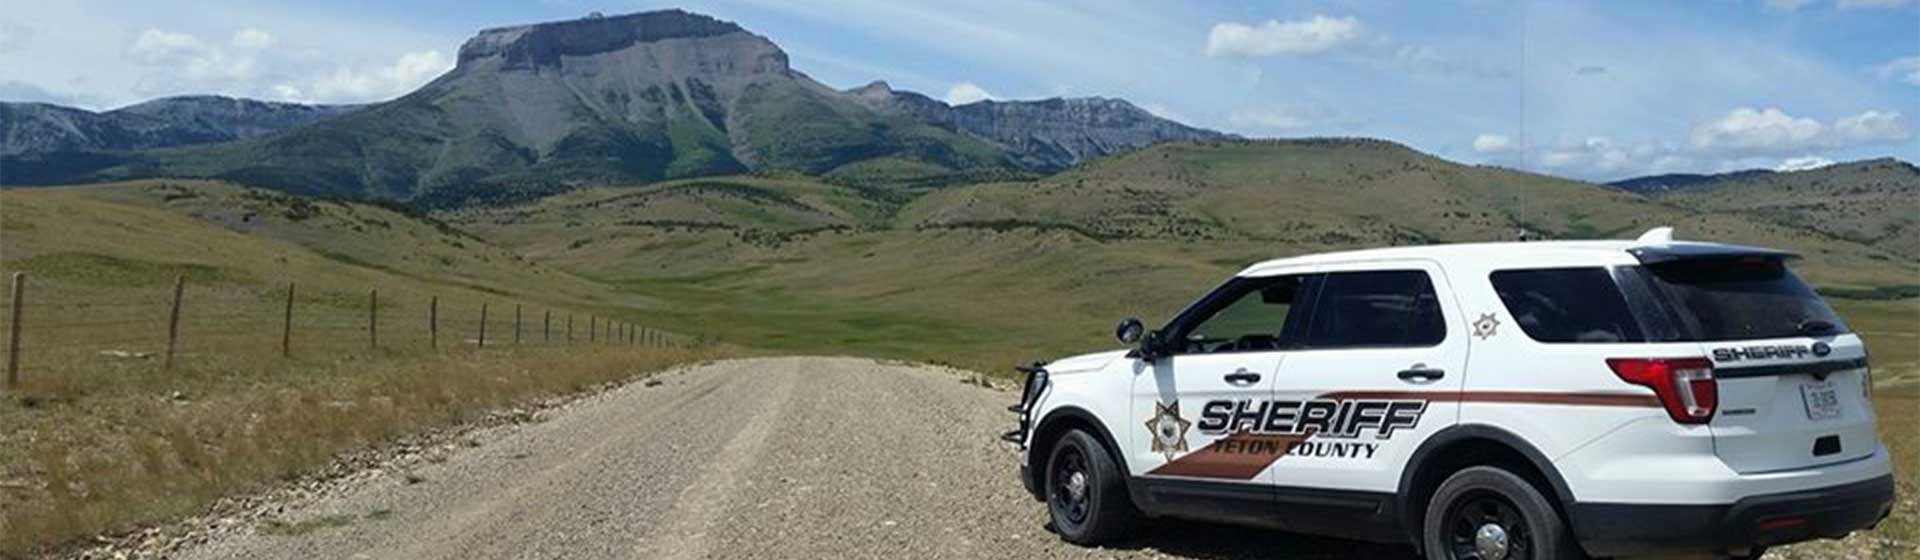 Sheriff vehicle with mountain range in the distance